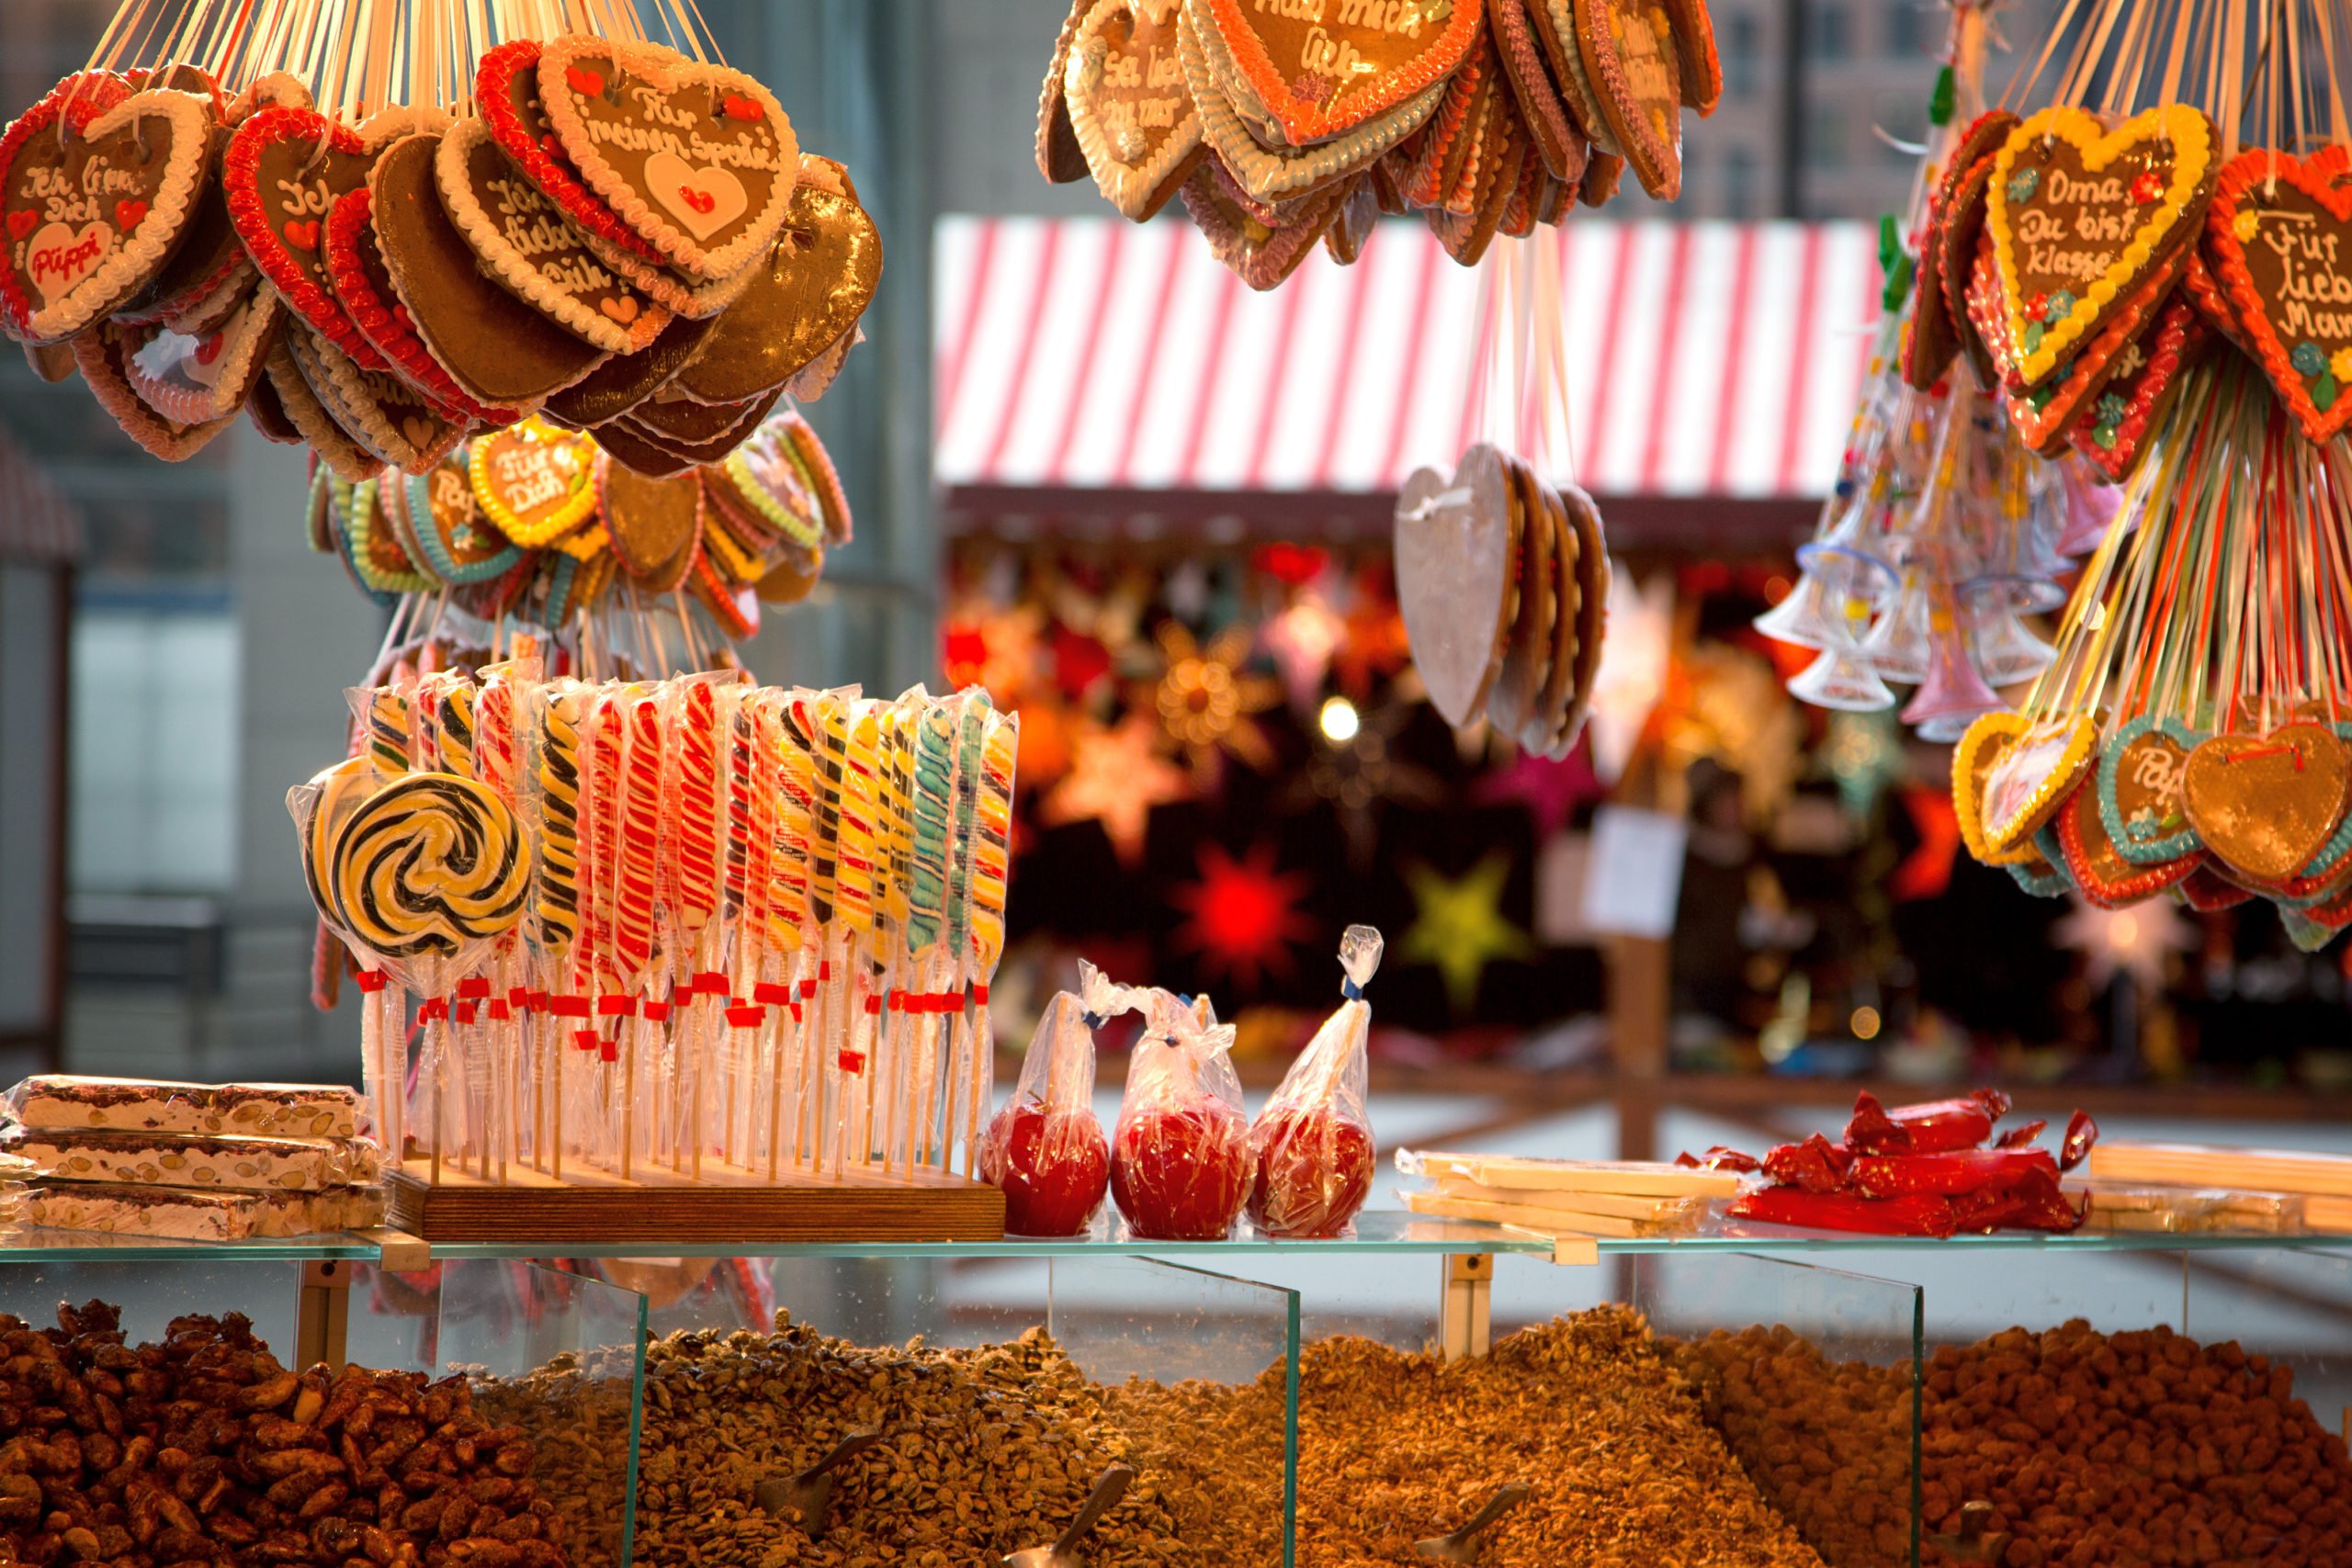 christmas candy and gingerbread at a market stall